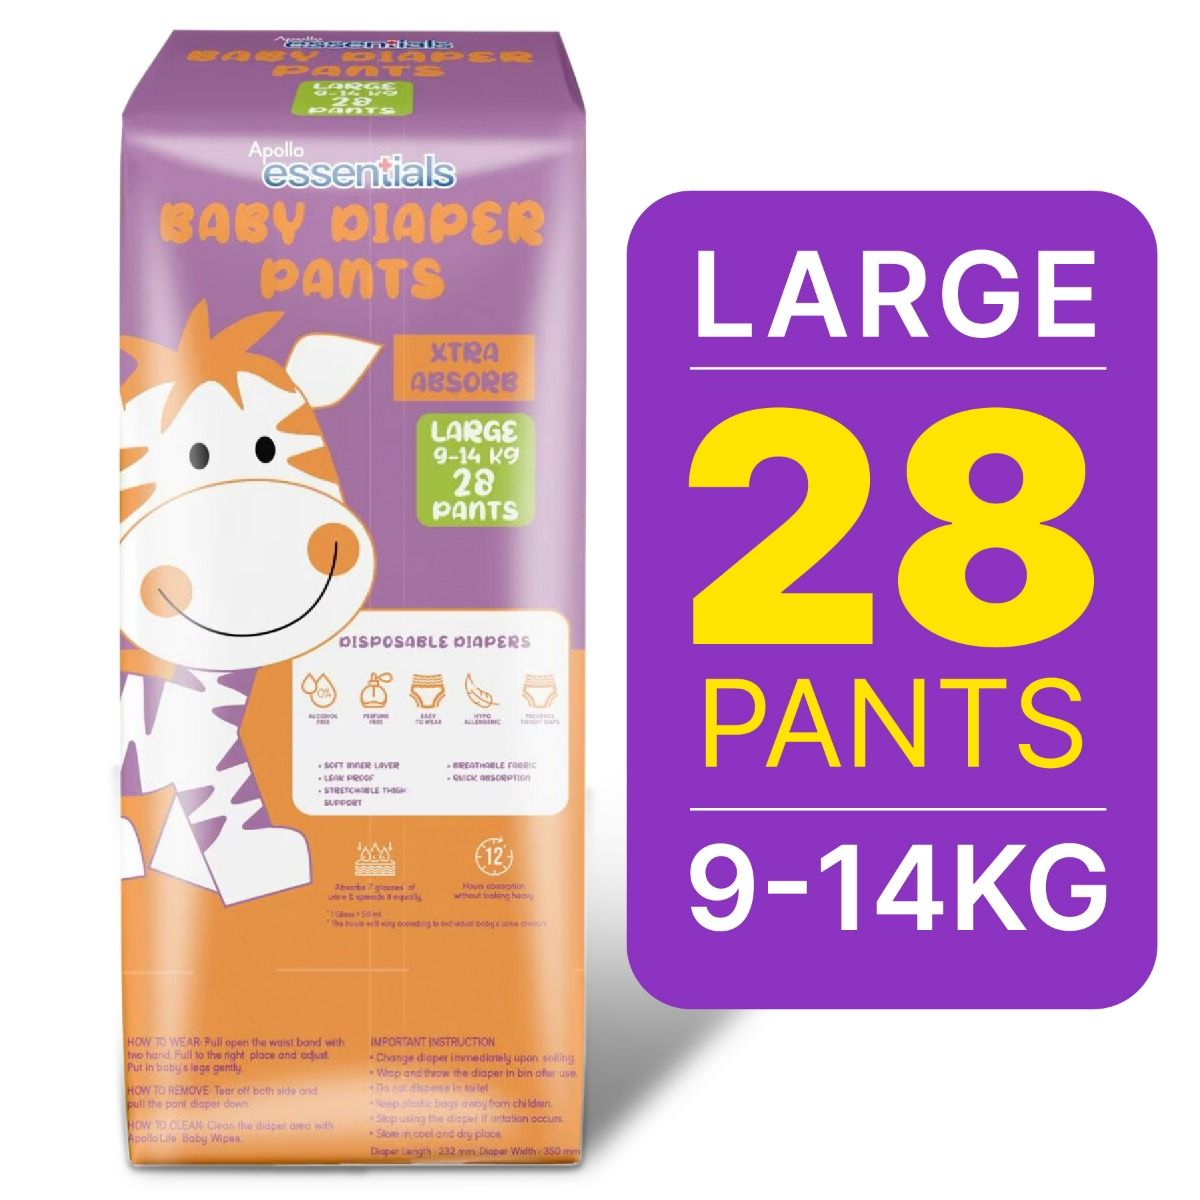 Buy Huggies Wonder Pants Large (L) Size Baby Diaper Pants, 46 count, with  Bubble Bed Technology for comfort Online at Low Prices in India - Amazon.in